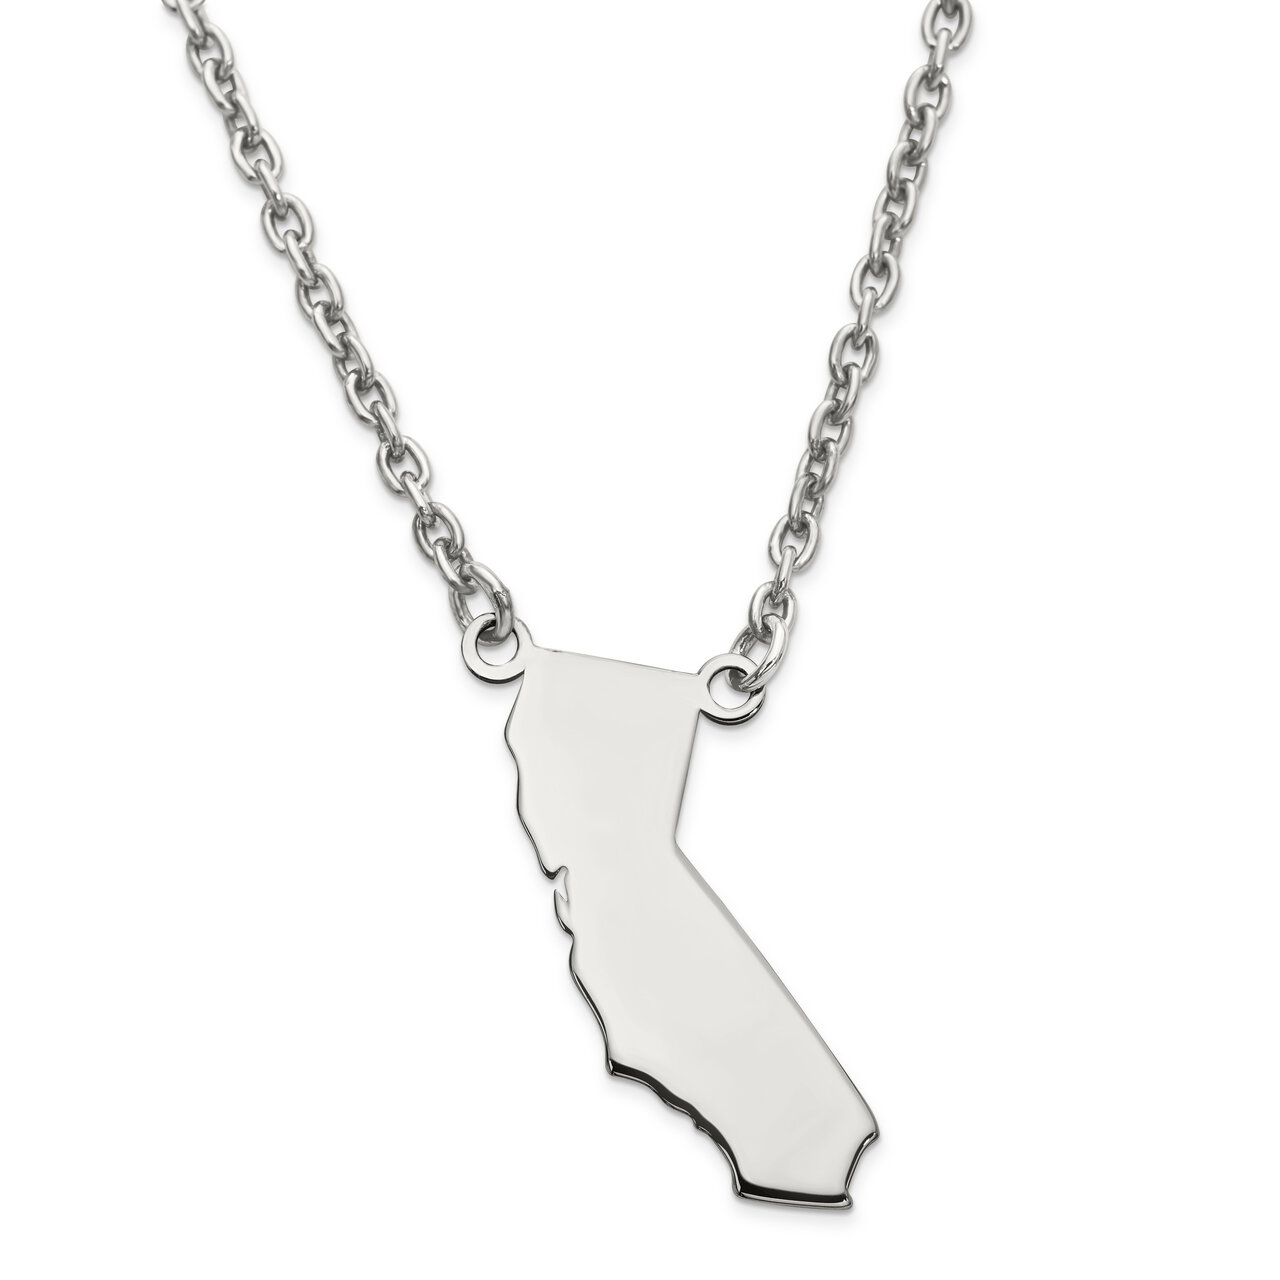 California State Pendant Necklace with Chain Sterling Silver Engravable XNA706SS-CA